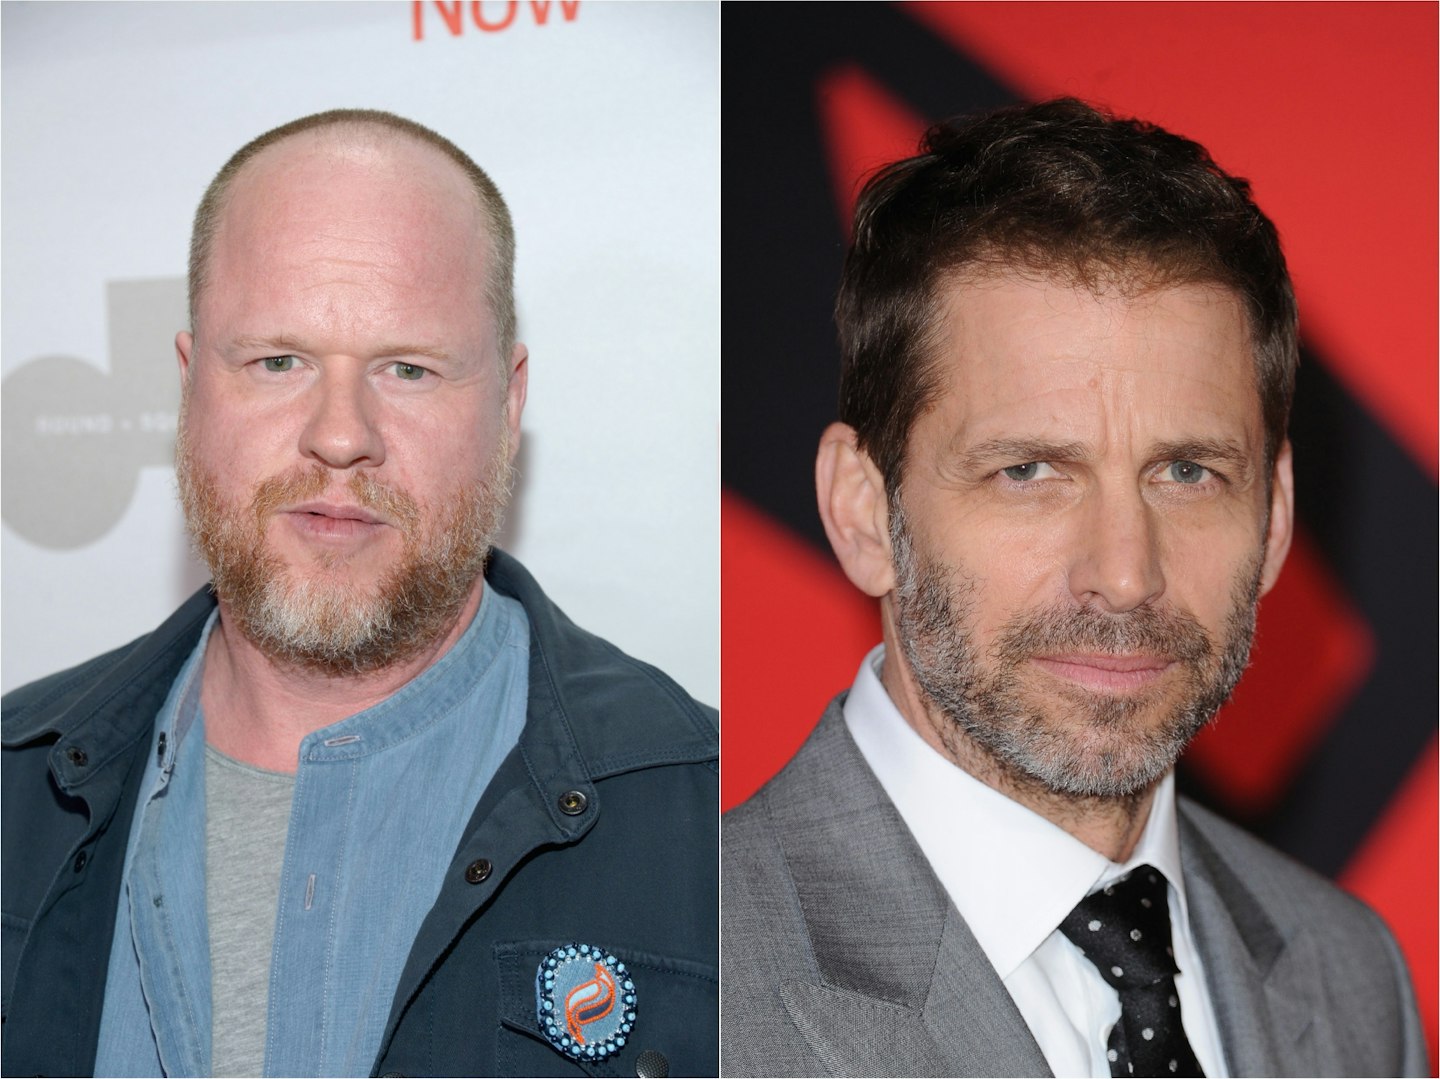 Joss Whedon and Zack Snyder